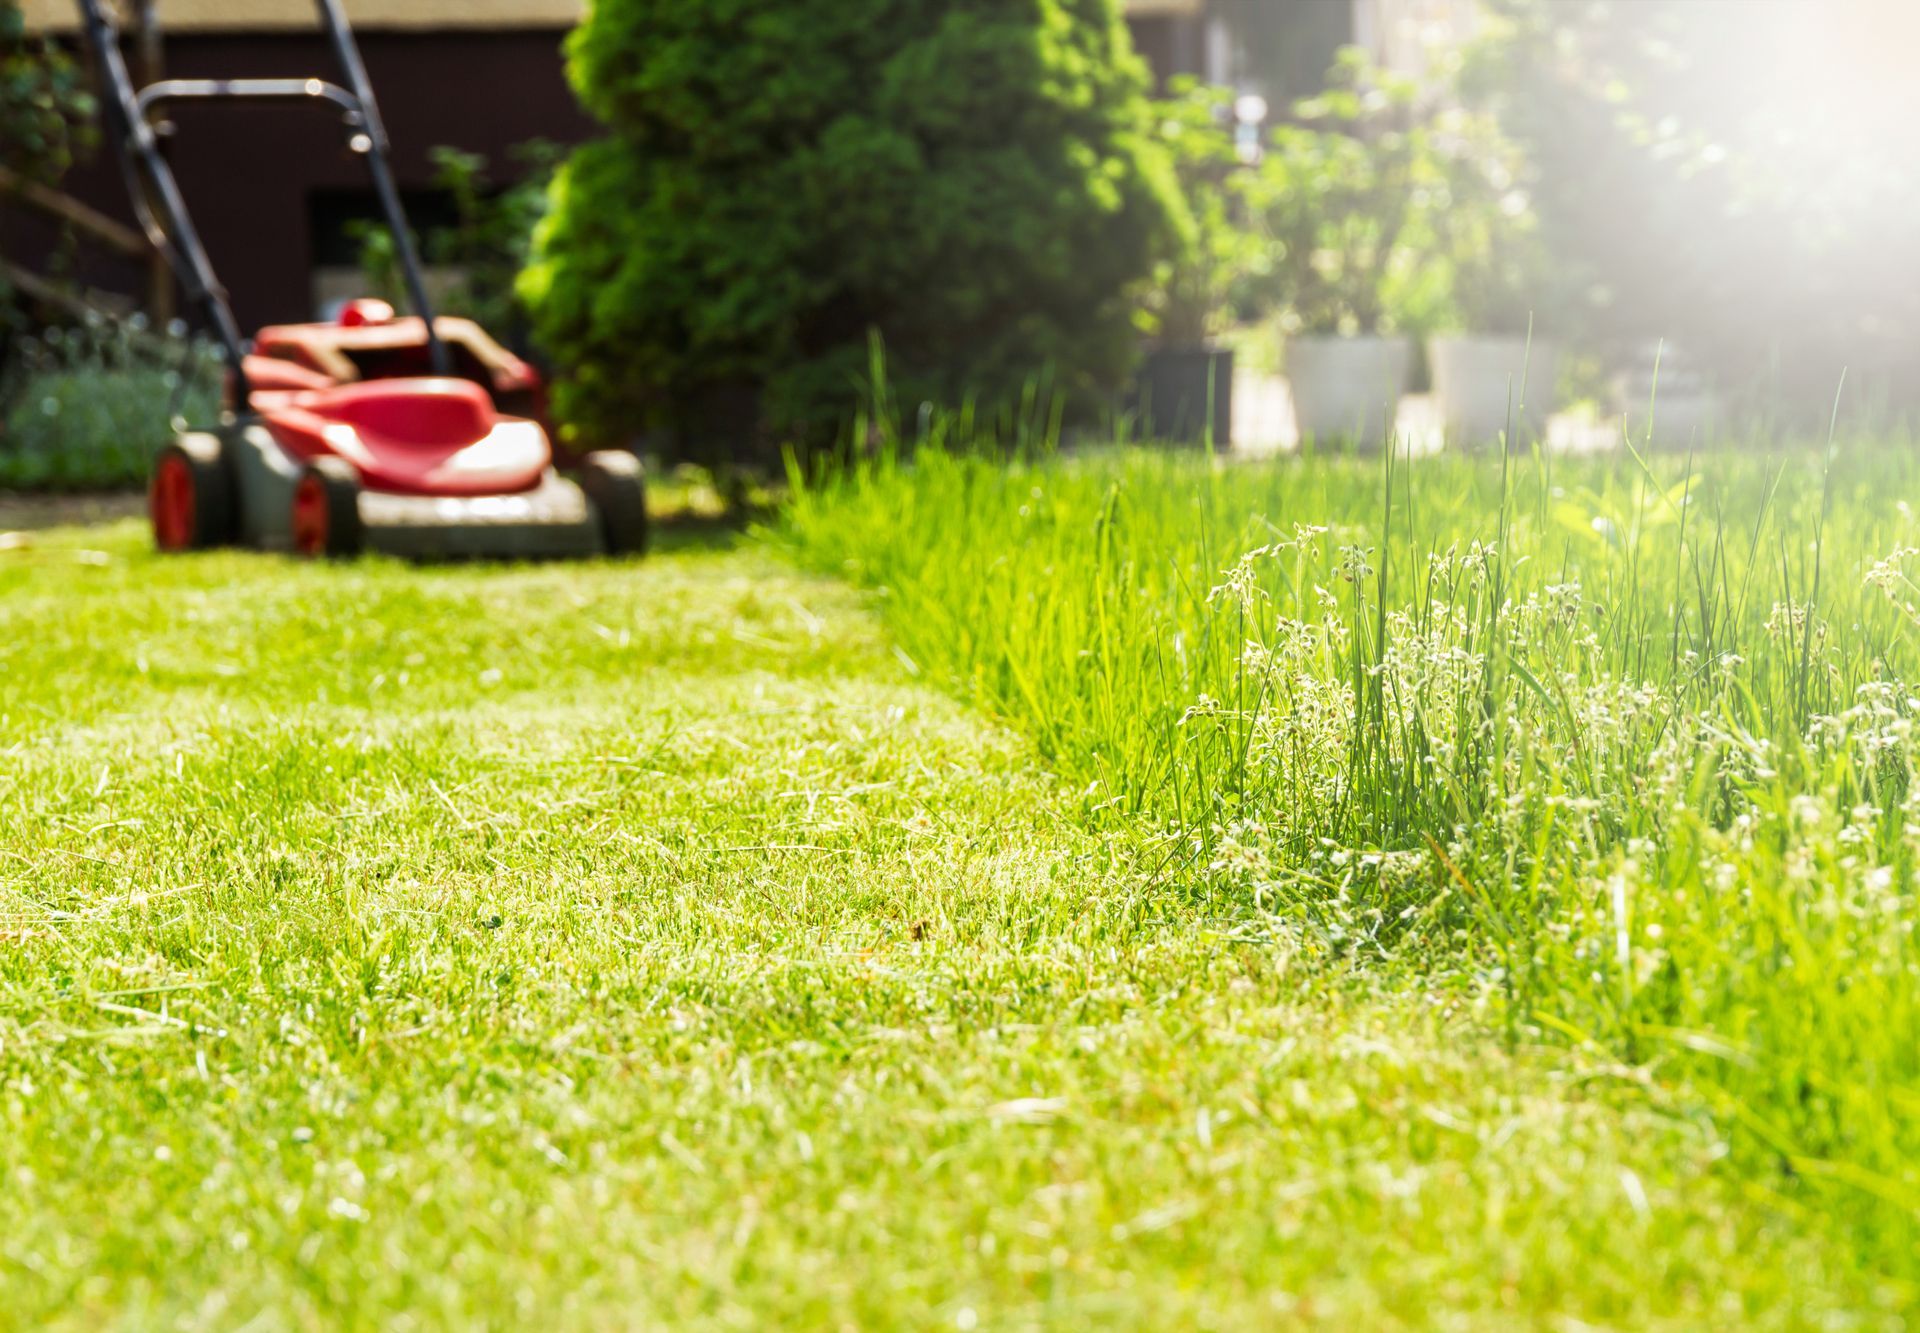 a red lawn mower is cutting a lush green lawn